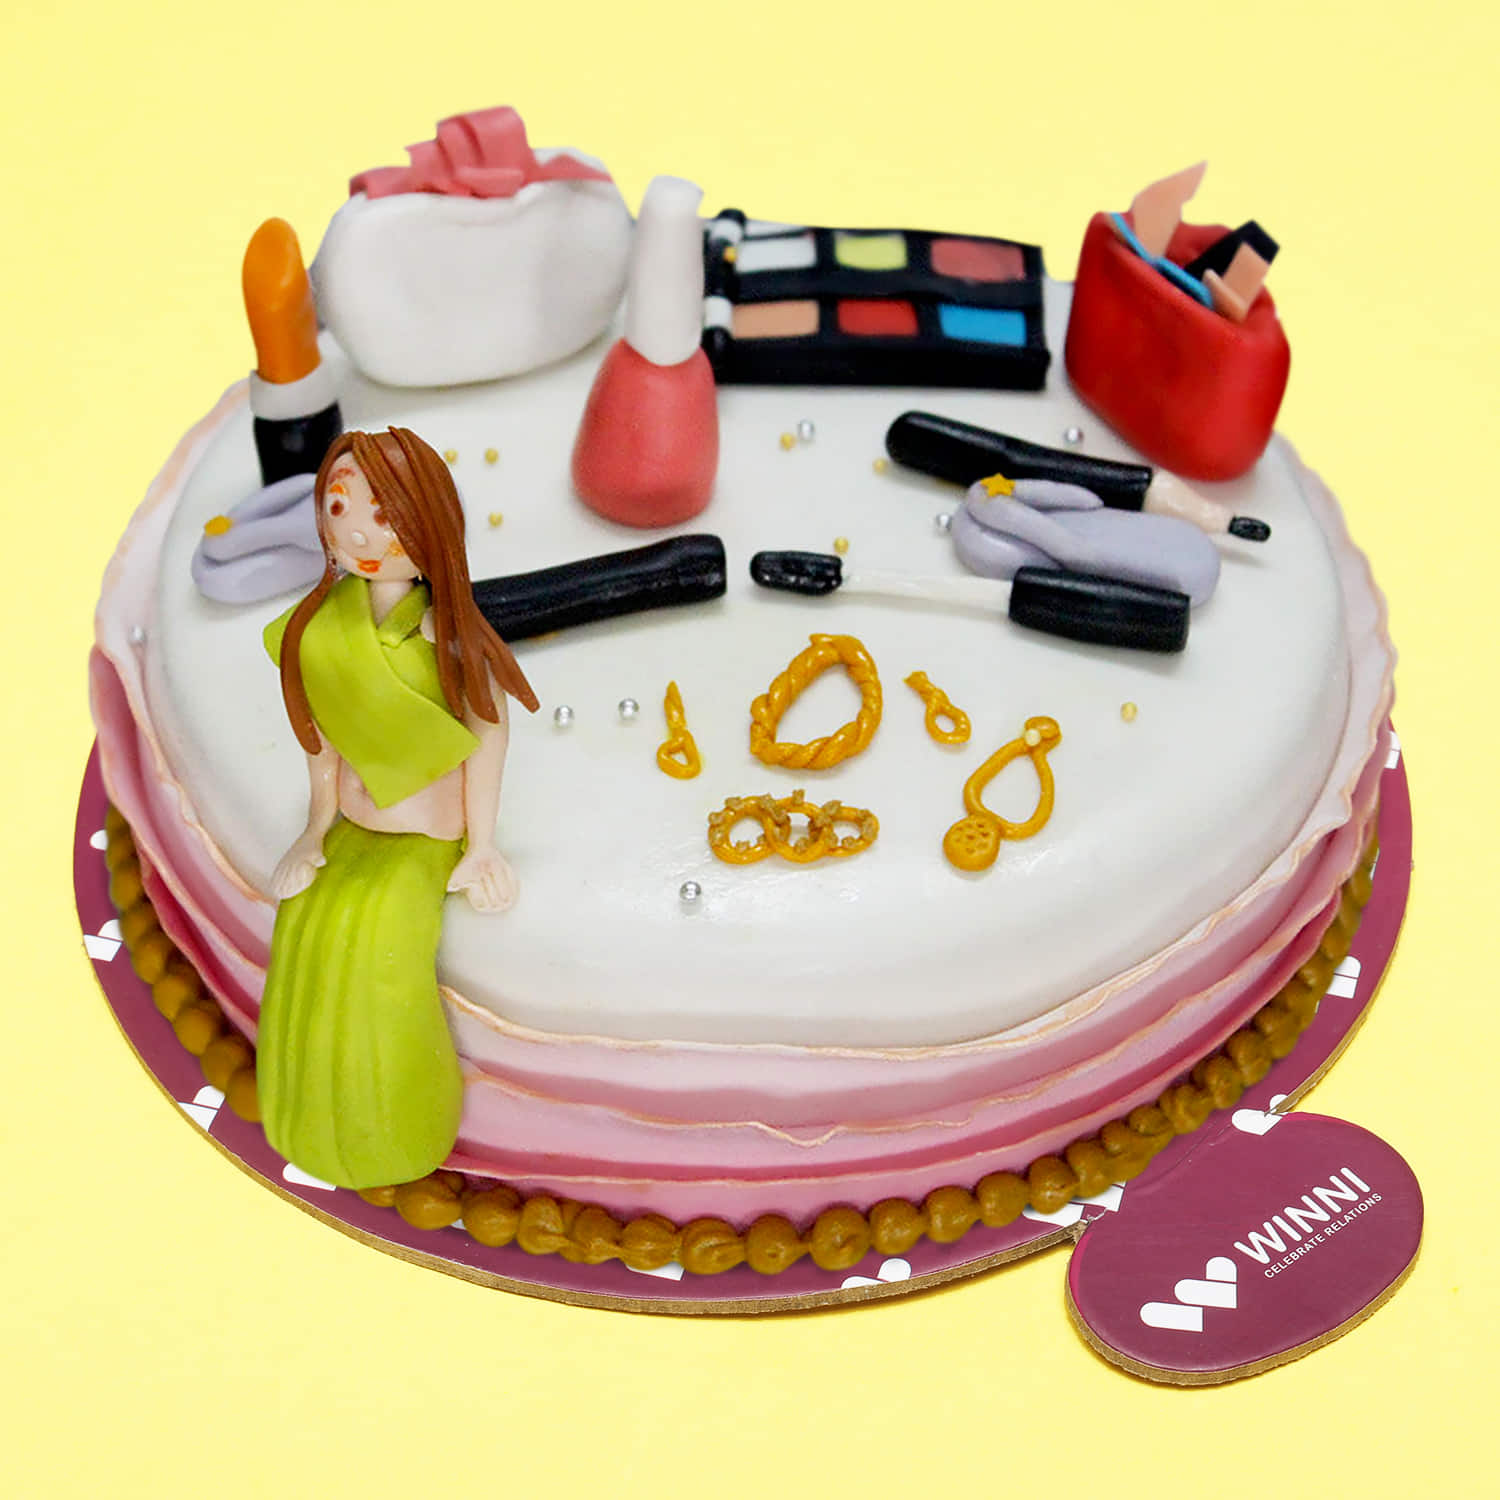 Online Cake Delivery in Indonesia | Send Cakes to Indonesia